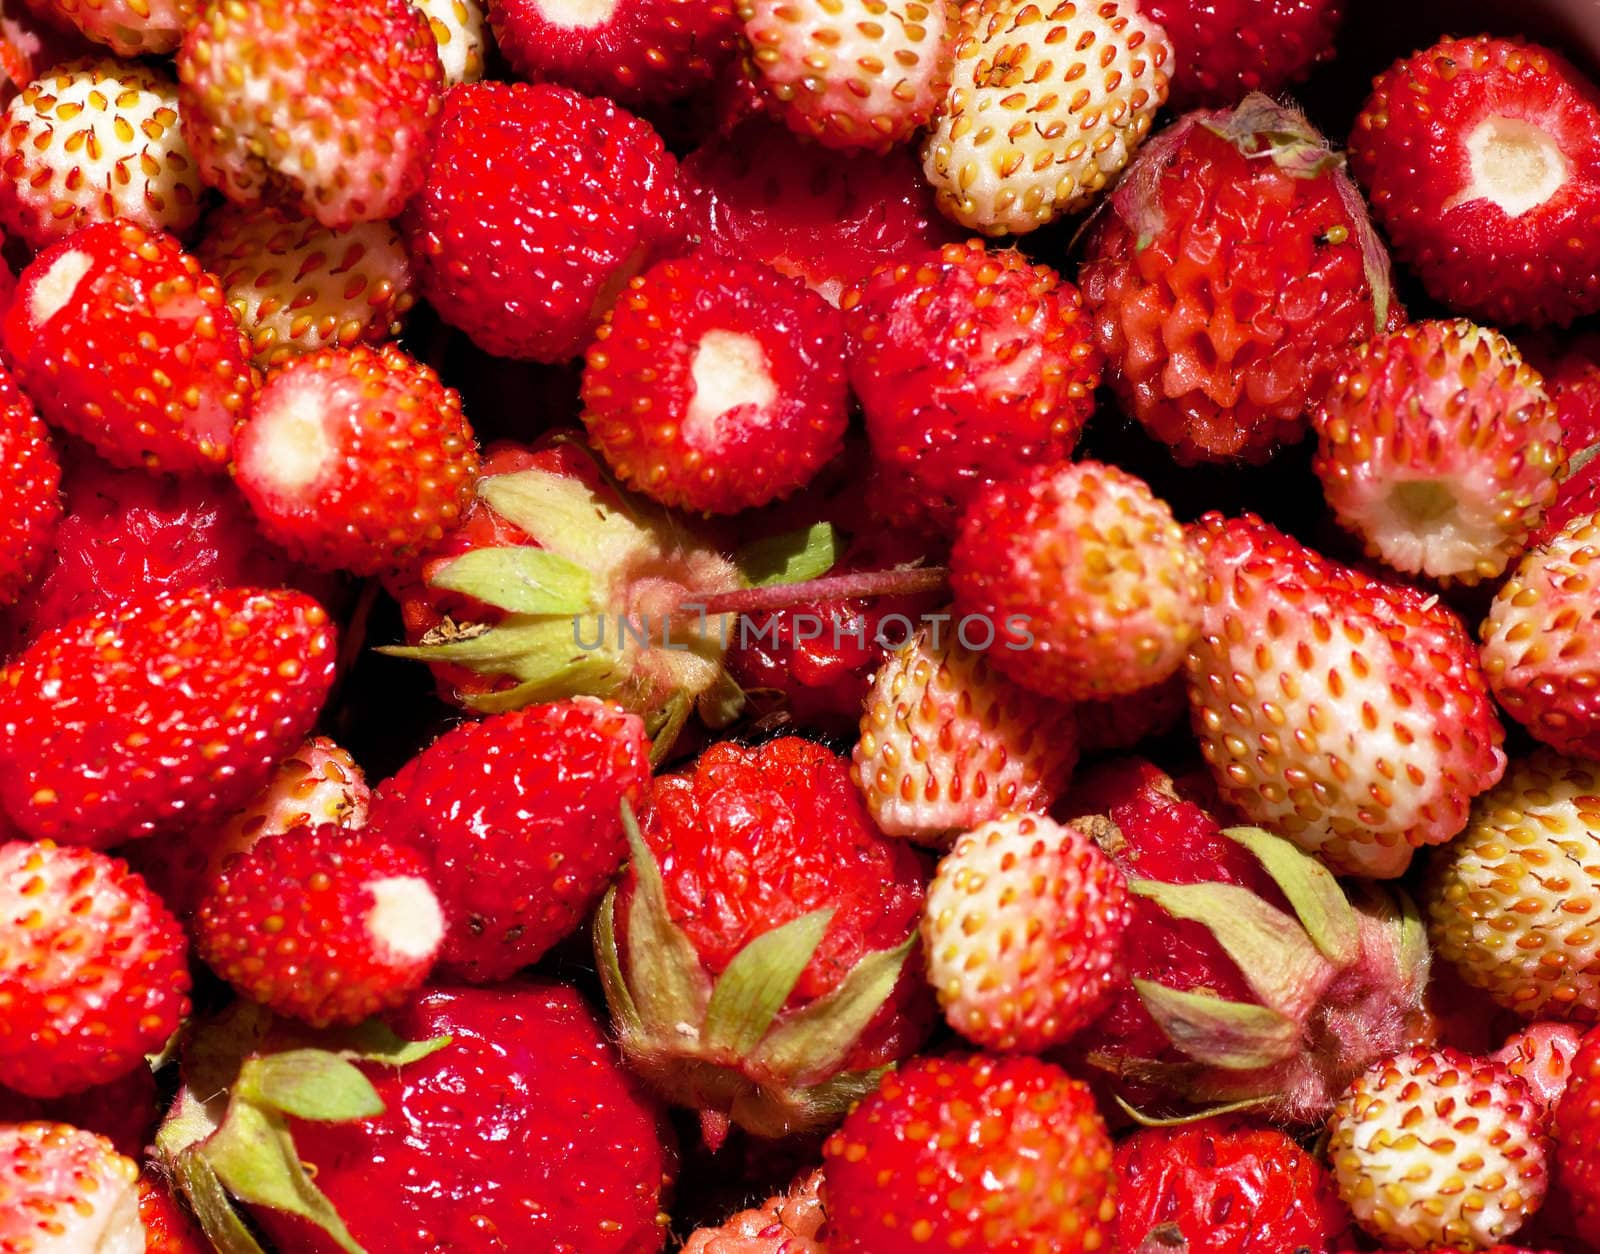 Strawberries by AGorohov